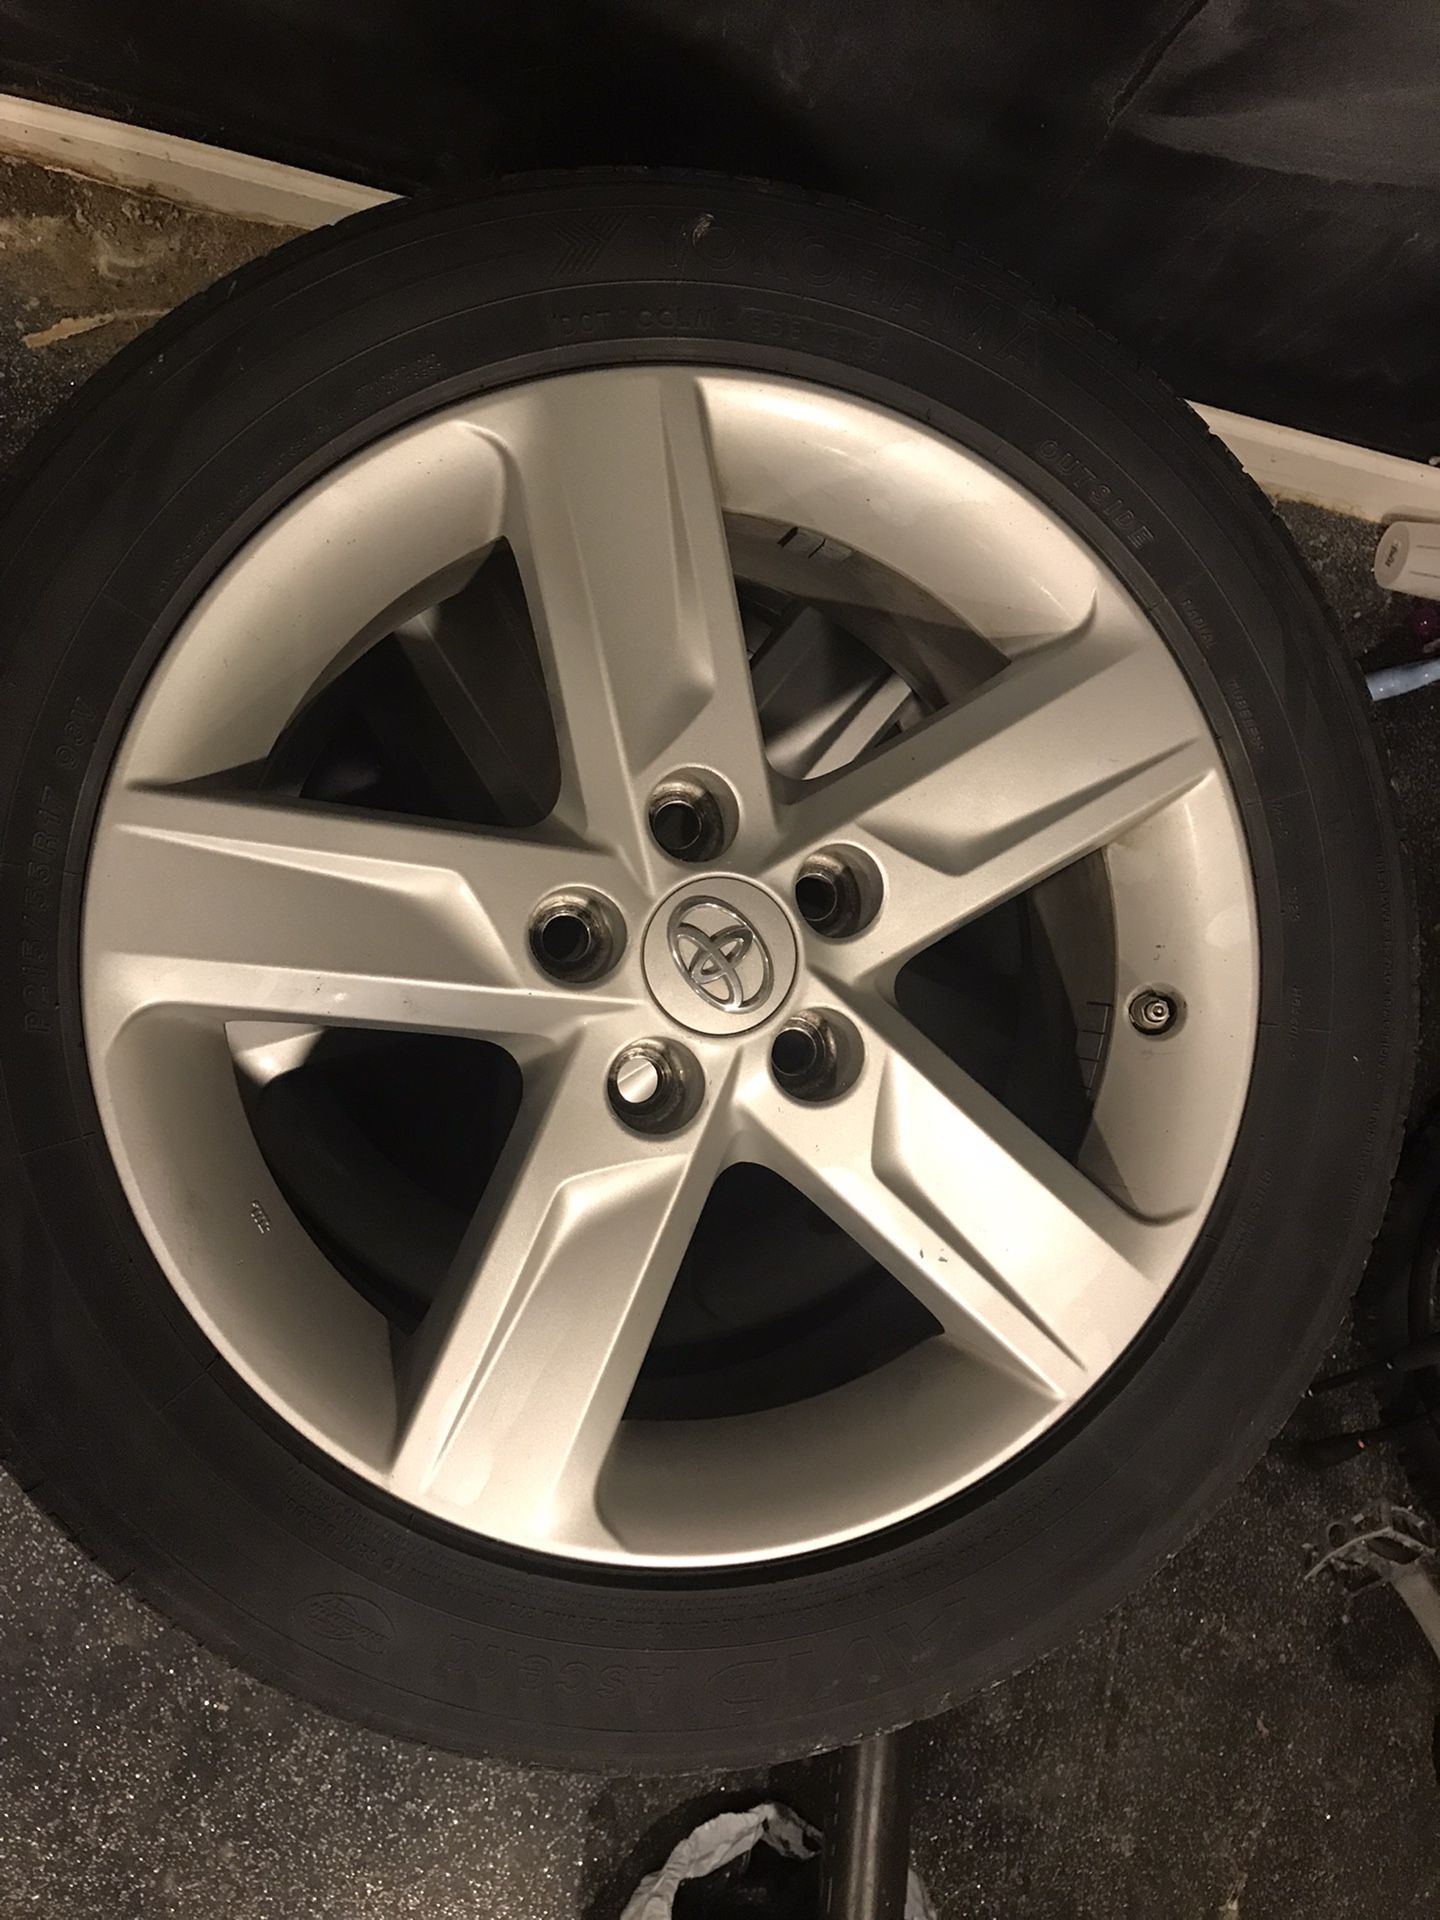 2013 Toyota Camry Stock 17” Rims And Tires